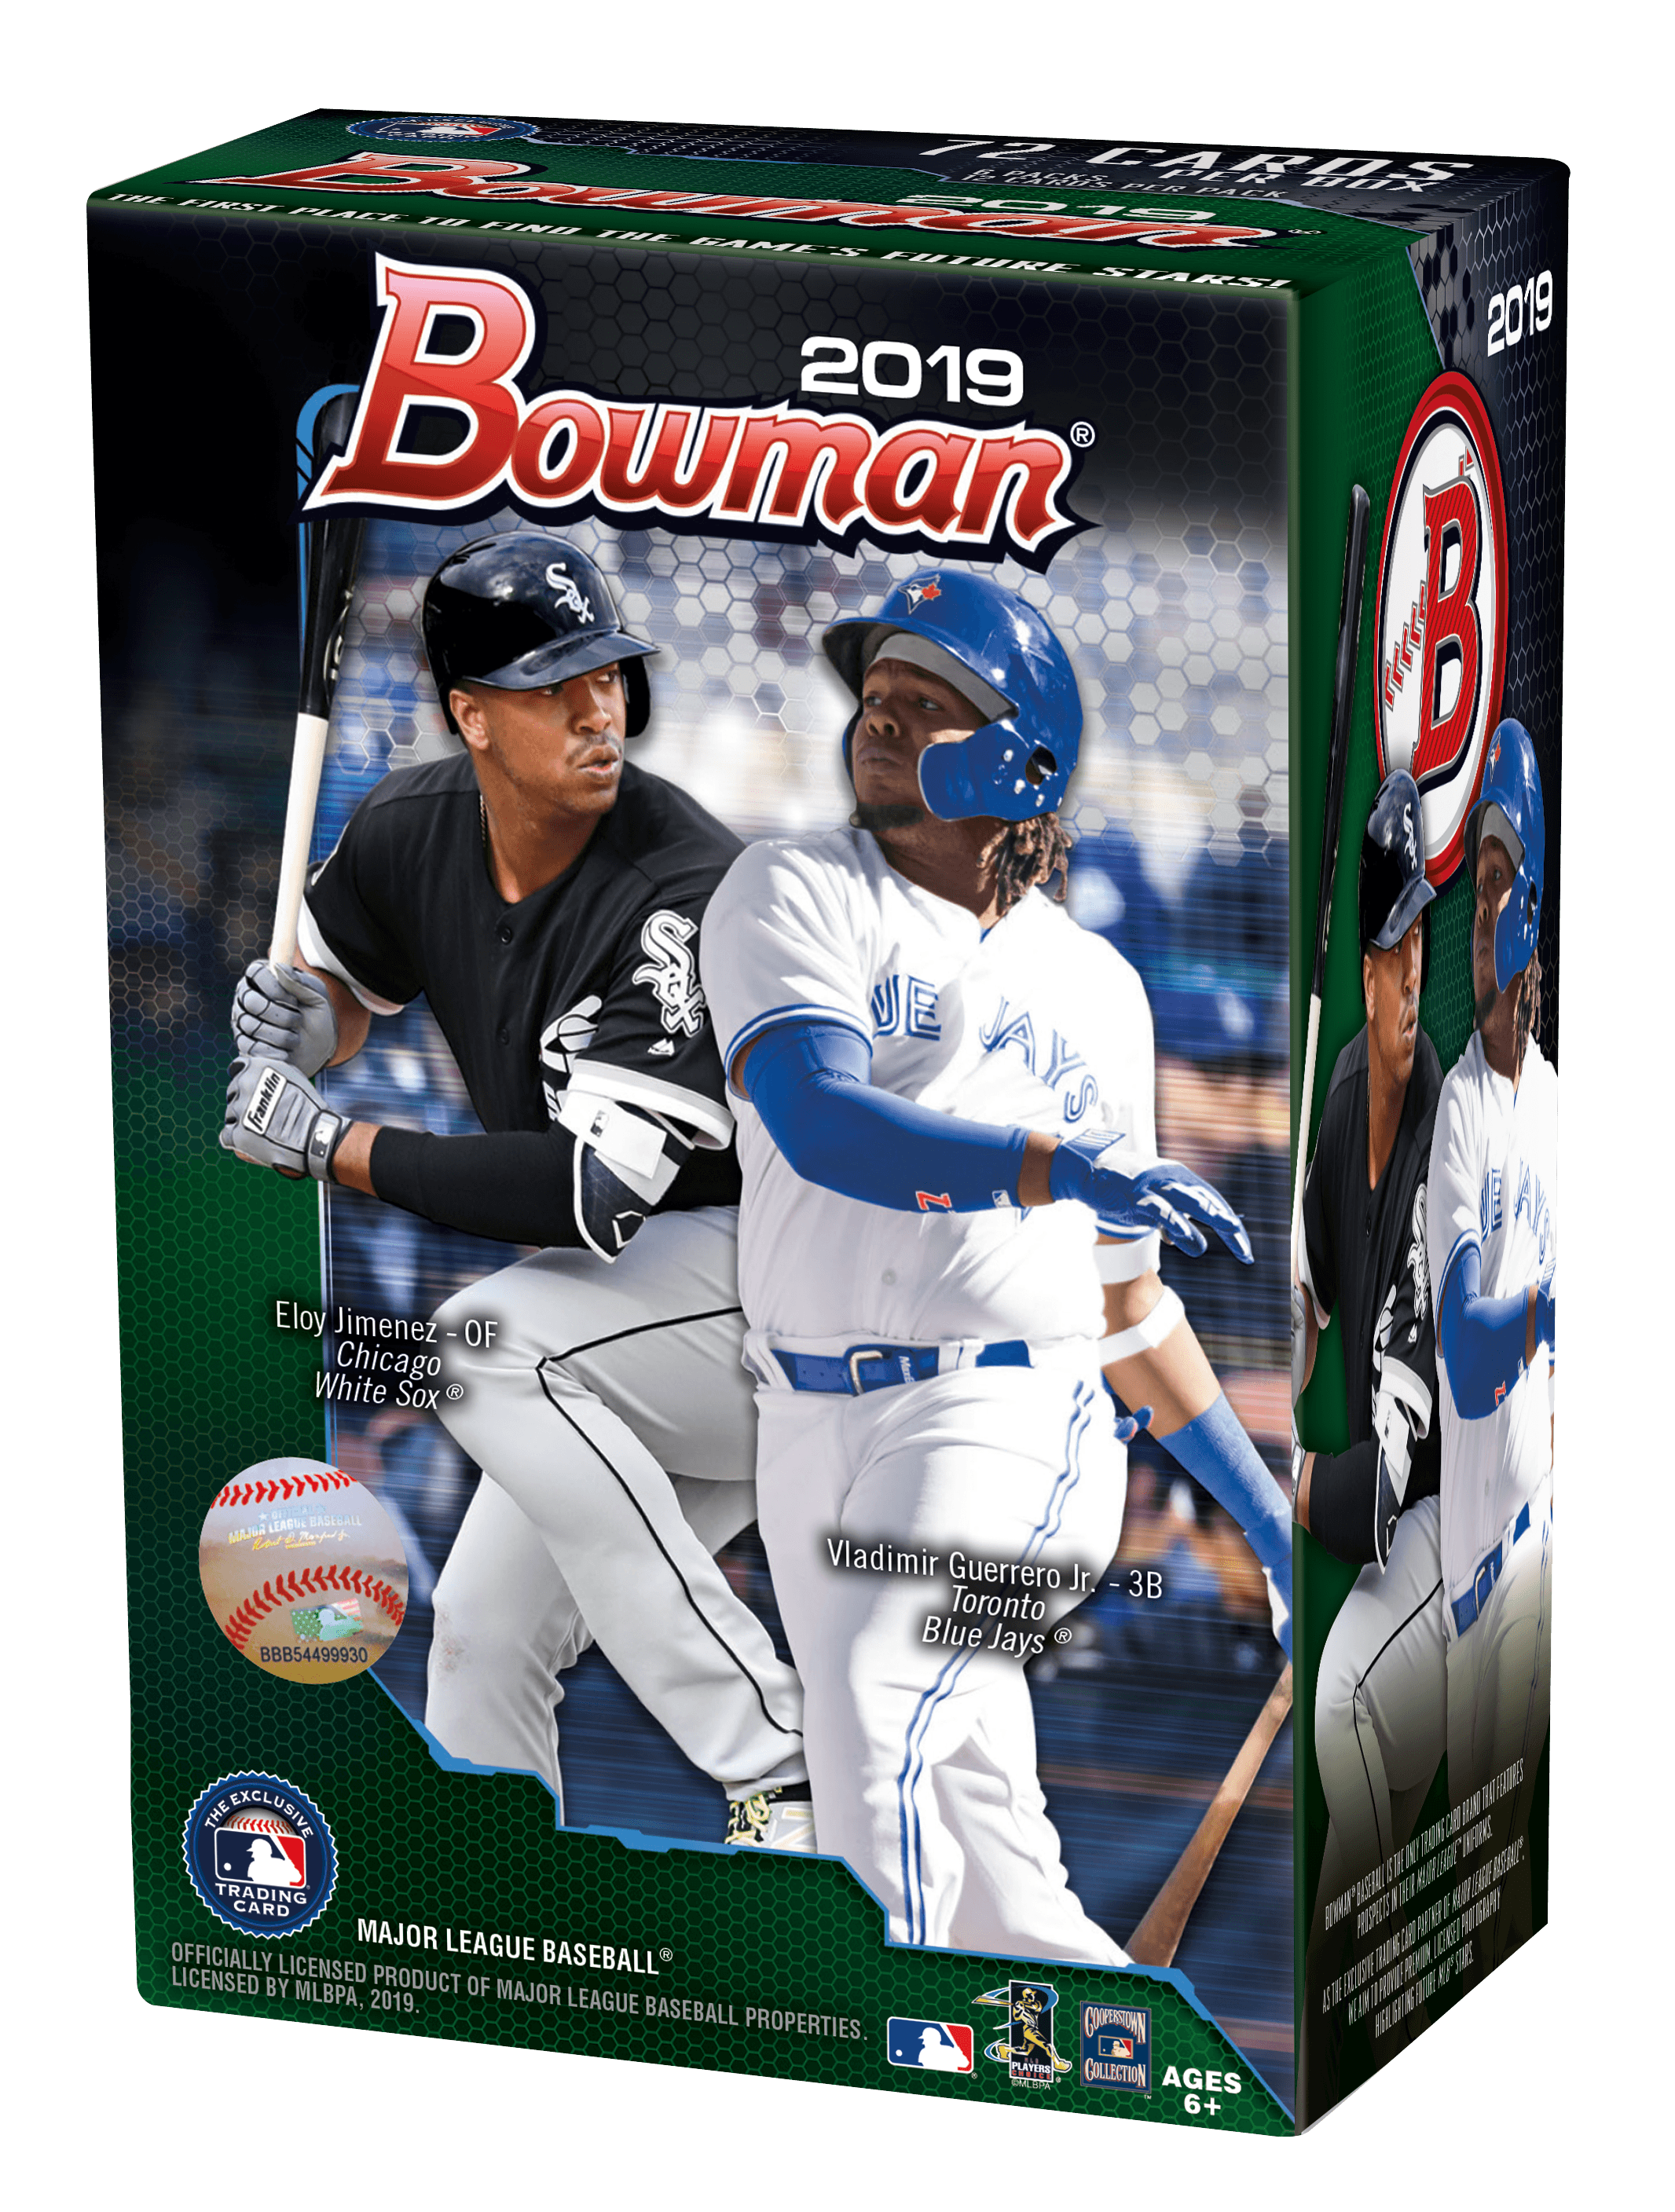 2019 Topps Bowman Baseball Blaster Box- 6ct with Chrome Parallel Inserts |  1989 30th Anniversary inserts | MLB Licensed Trading Cards - Walmart.com